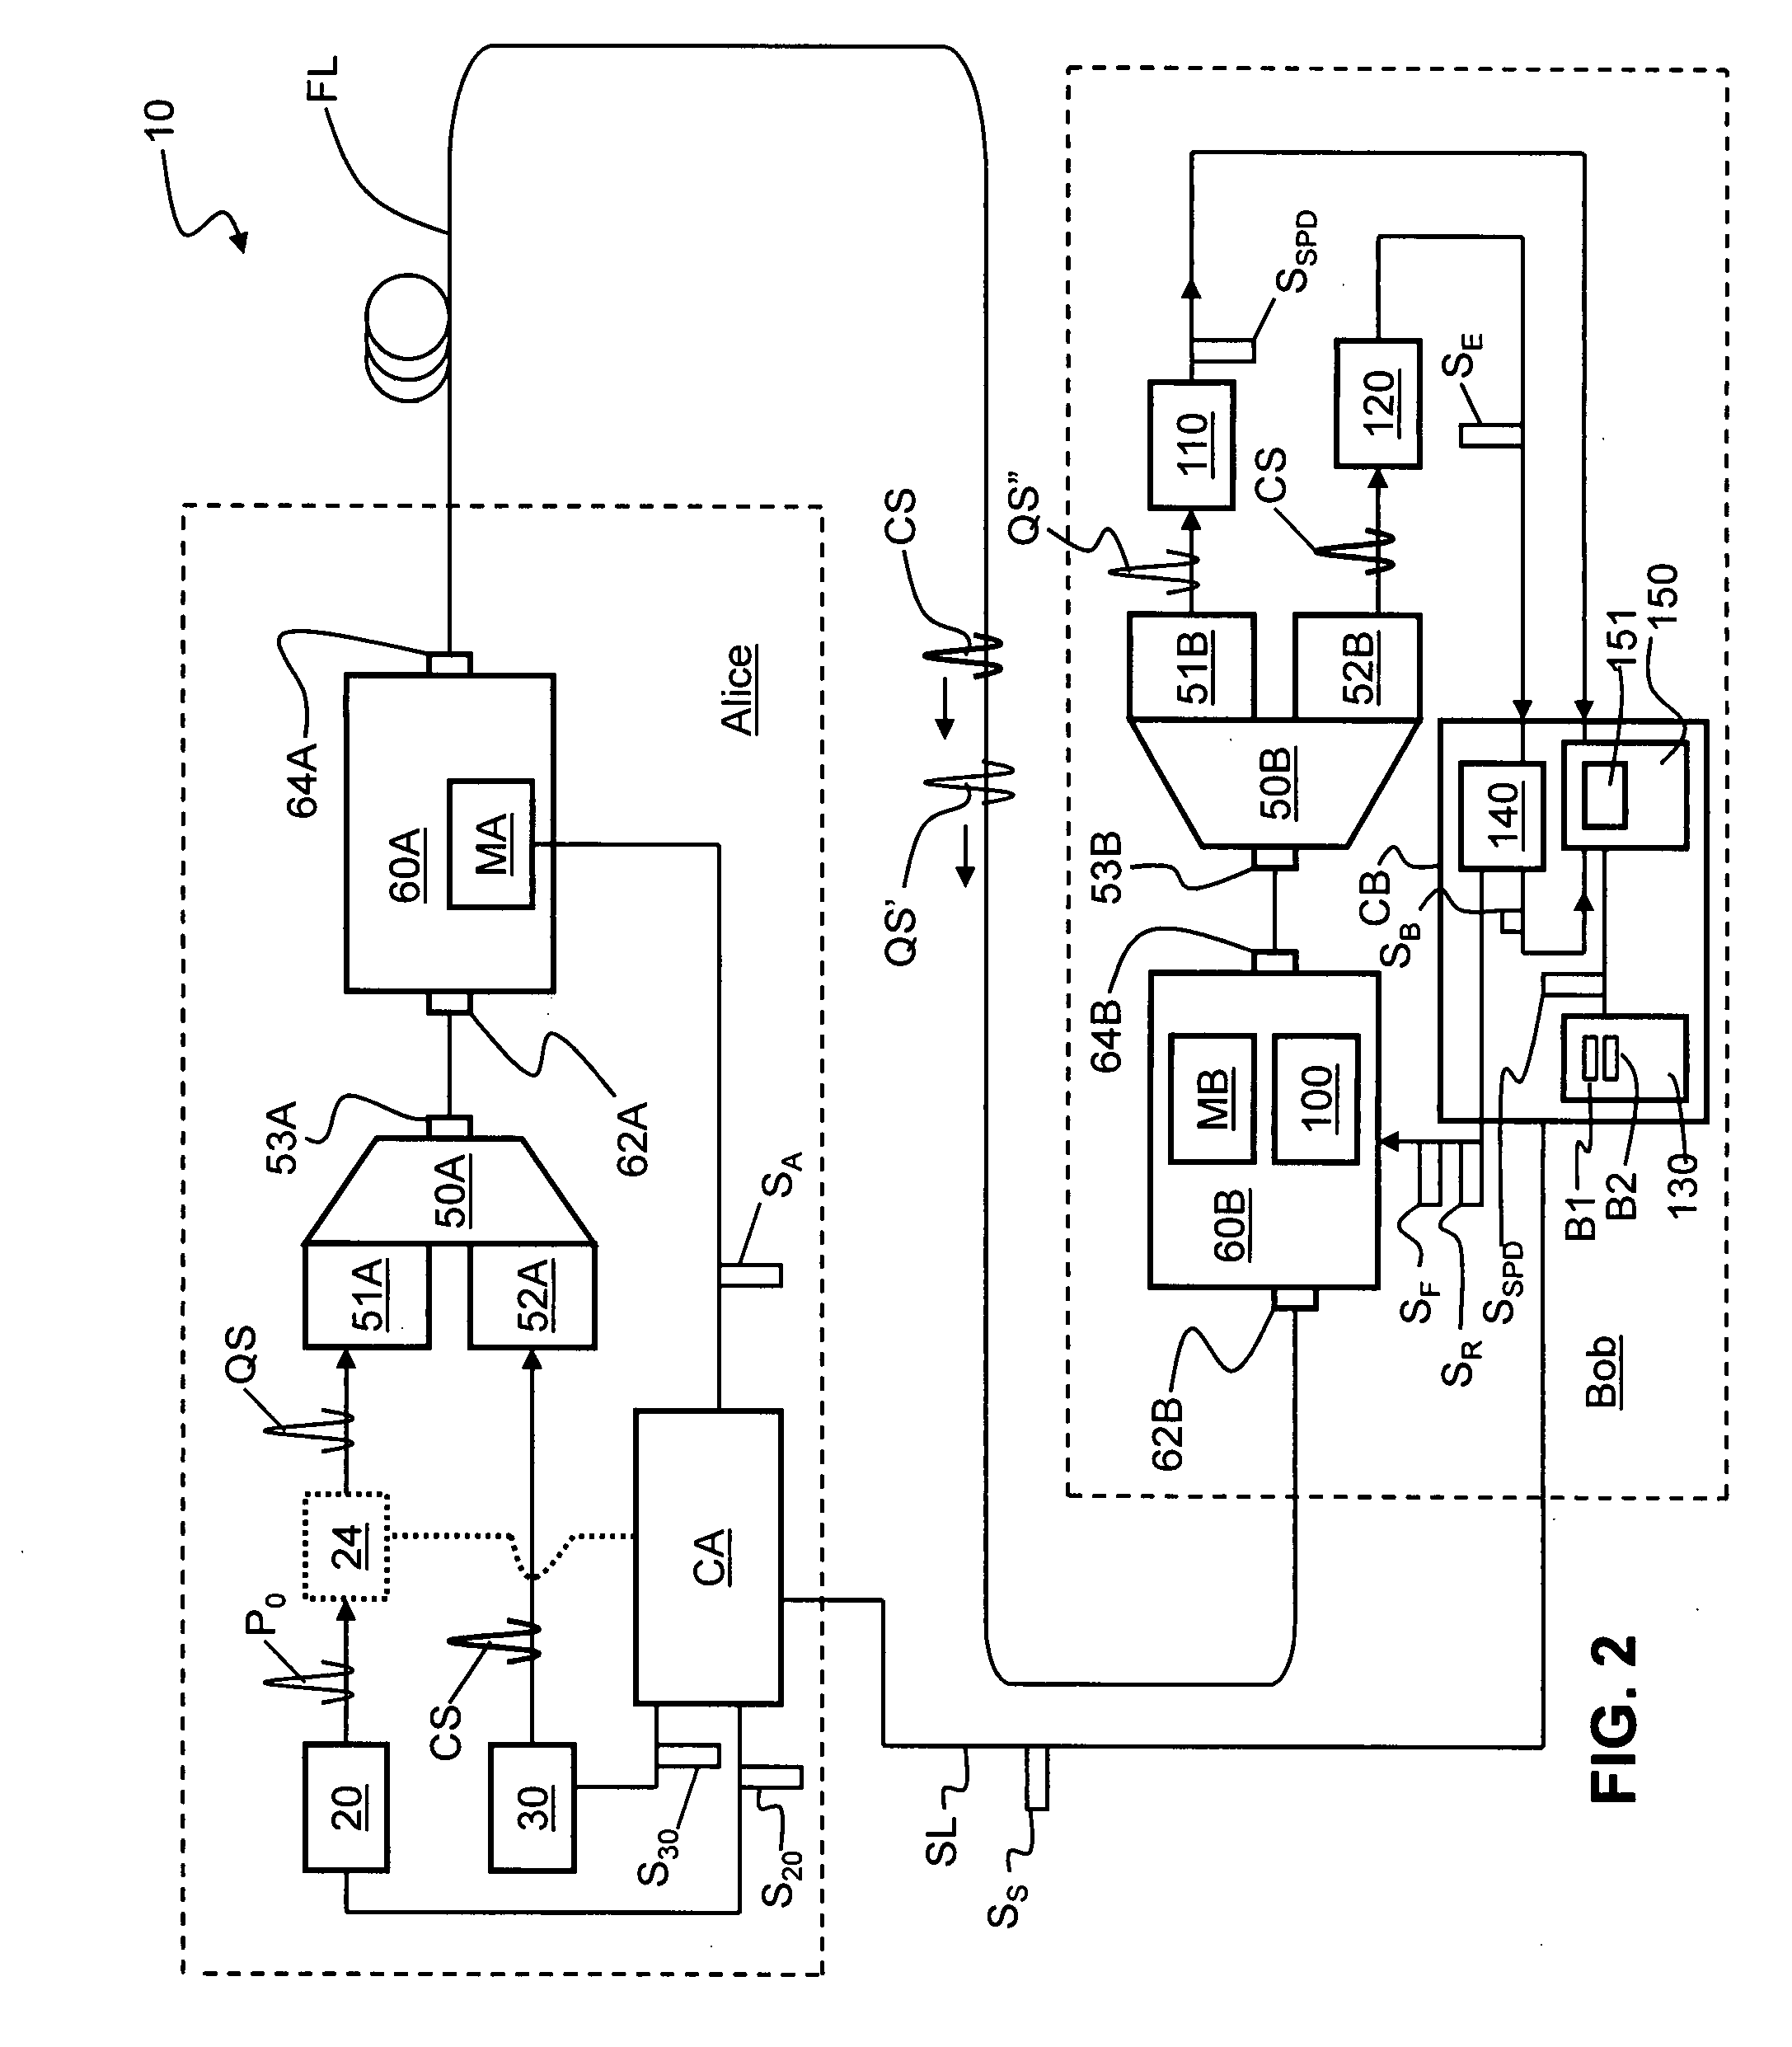 Systems and methods for enhanced quantum key formation using an actively compensated QKD system